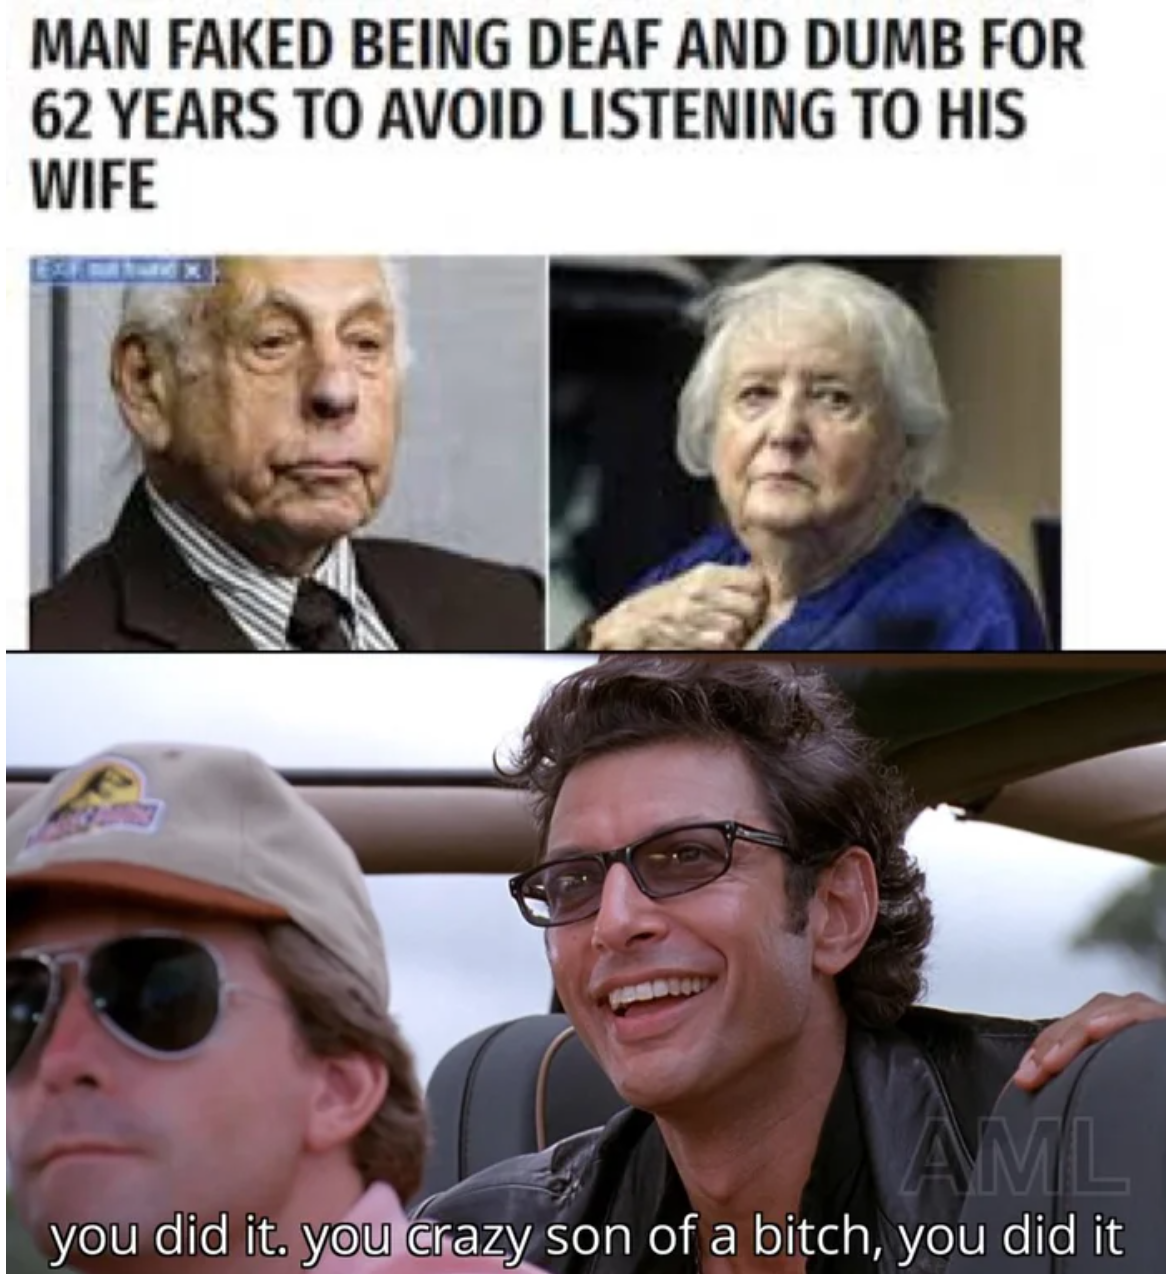 you did it you crazy son - Man Faked Being Deaf And Dumb For 62 Years To Avoid Listening To His Wife Aml you did it. you crazy son of a bitch, you did it